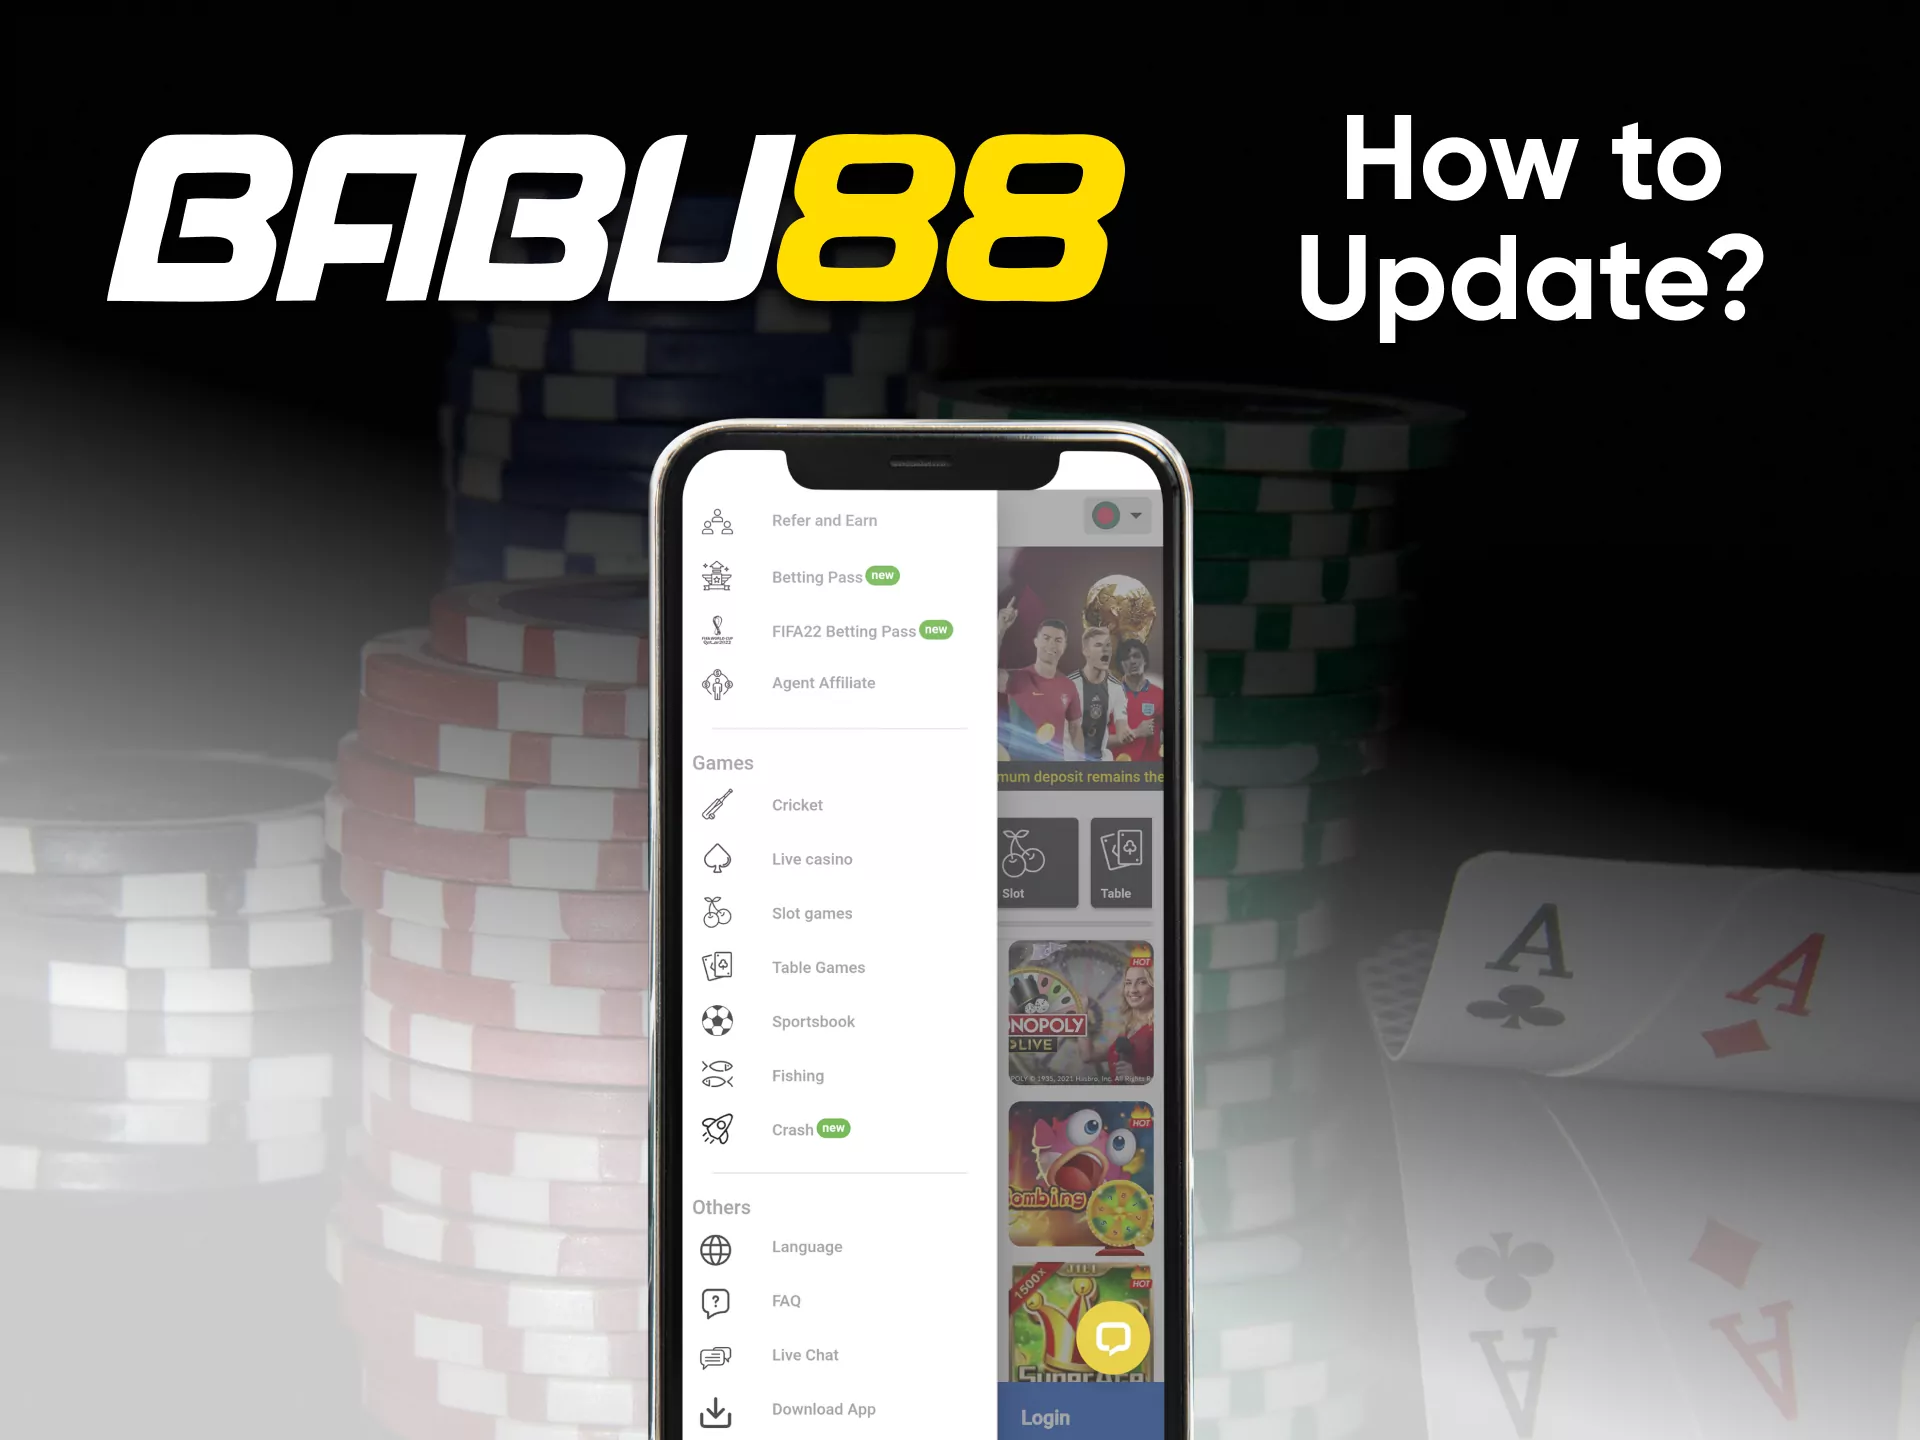 For the best work of the Babu88 application, the bookmaker is making updates.